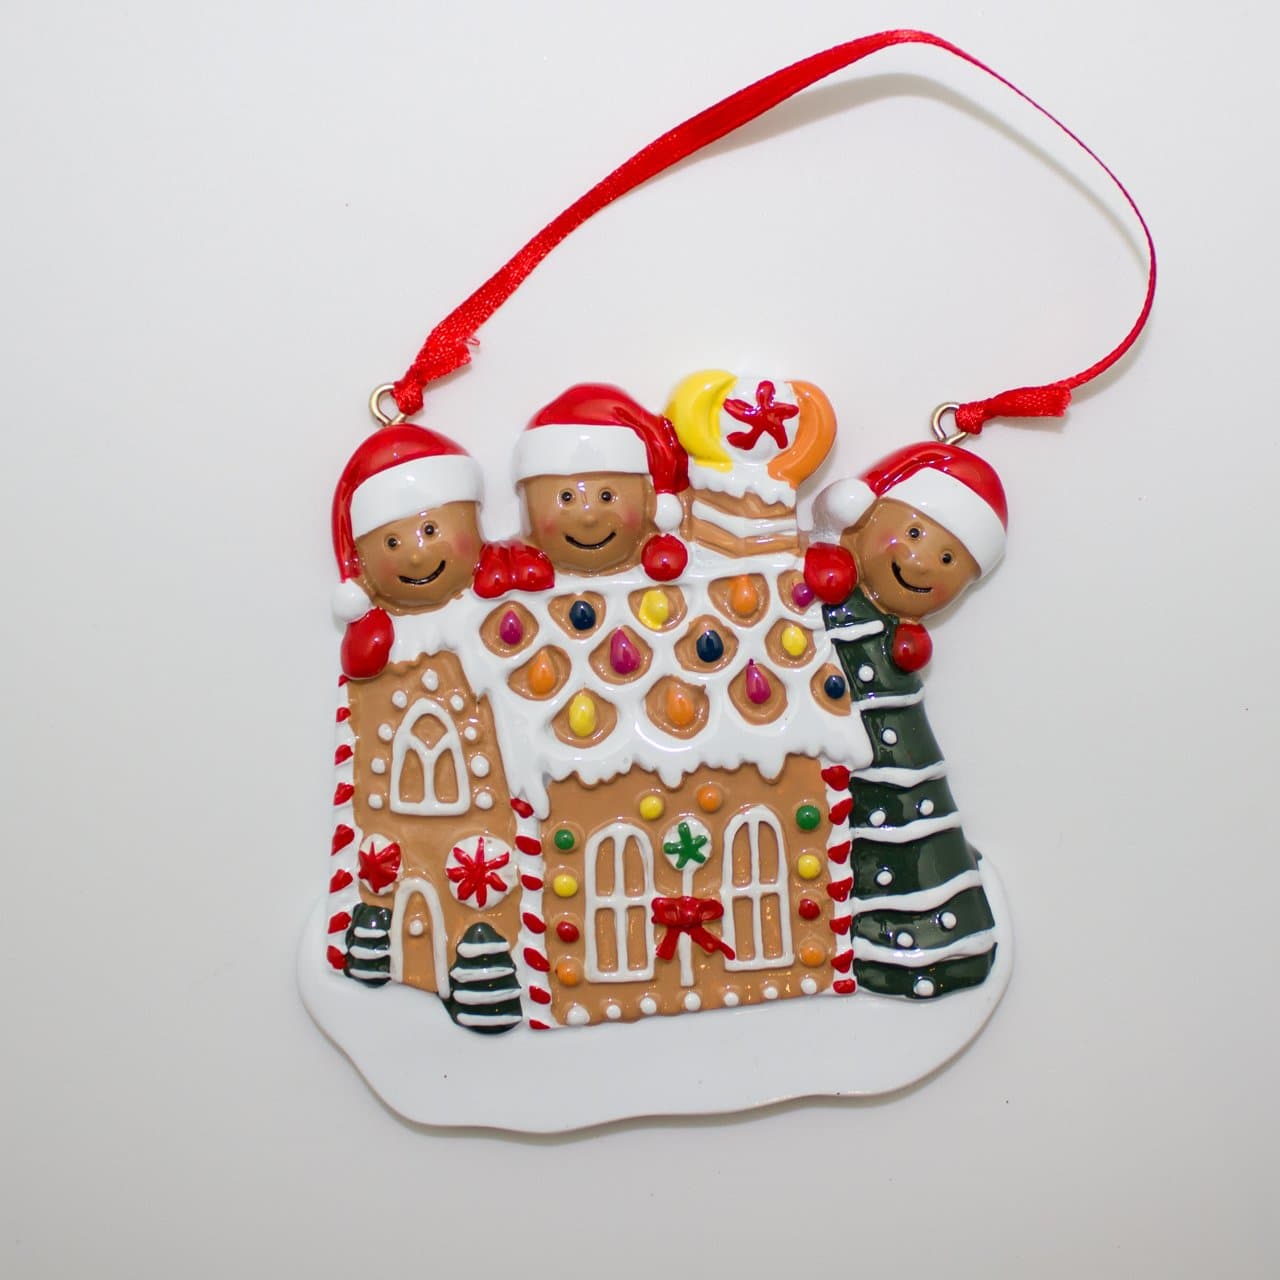 Gingerbread Man House - Christmas Ornament (Suitable for Personalization)